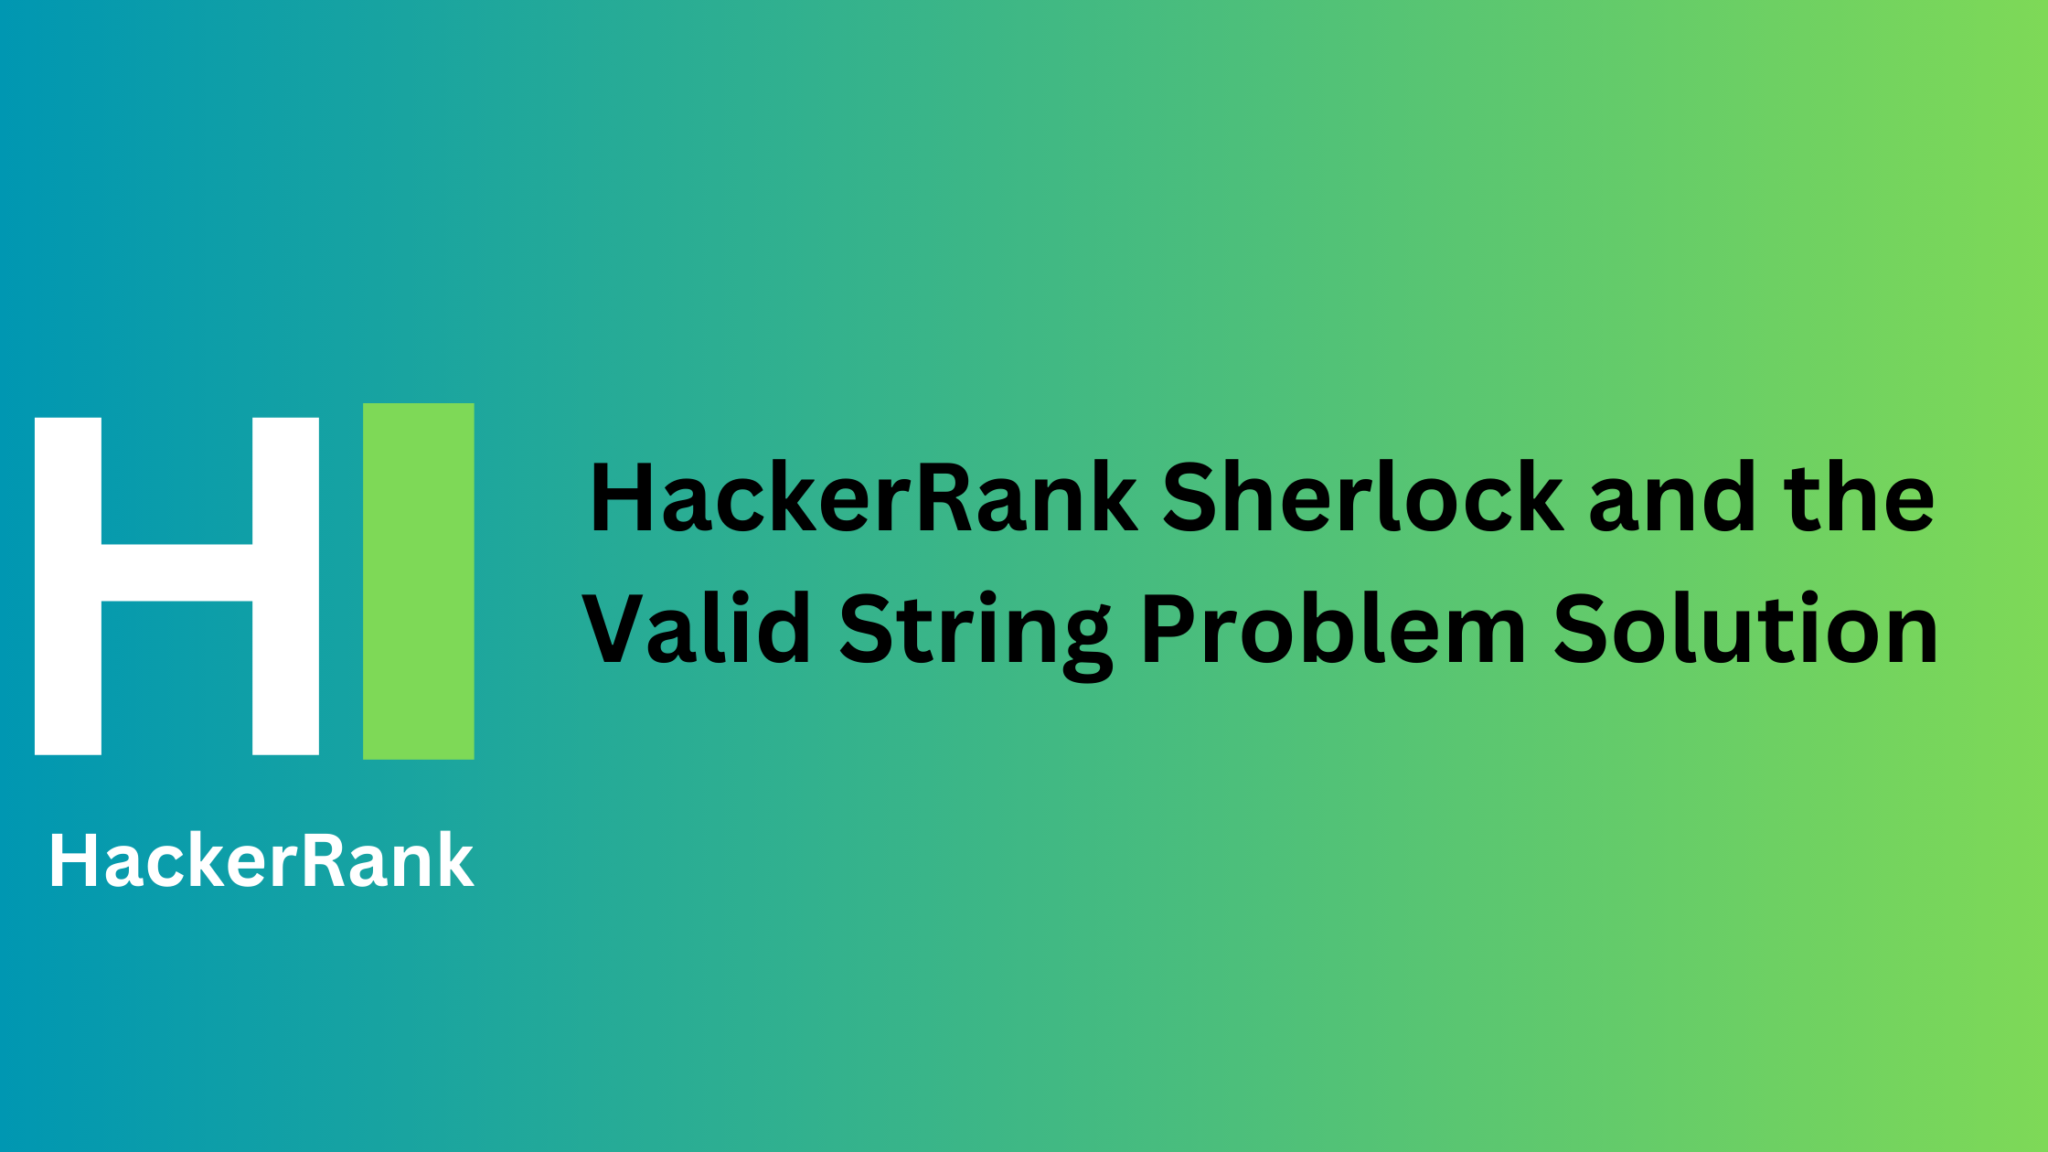 hackerrank-sherlock-and-the-valid-string-solution-thecscience